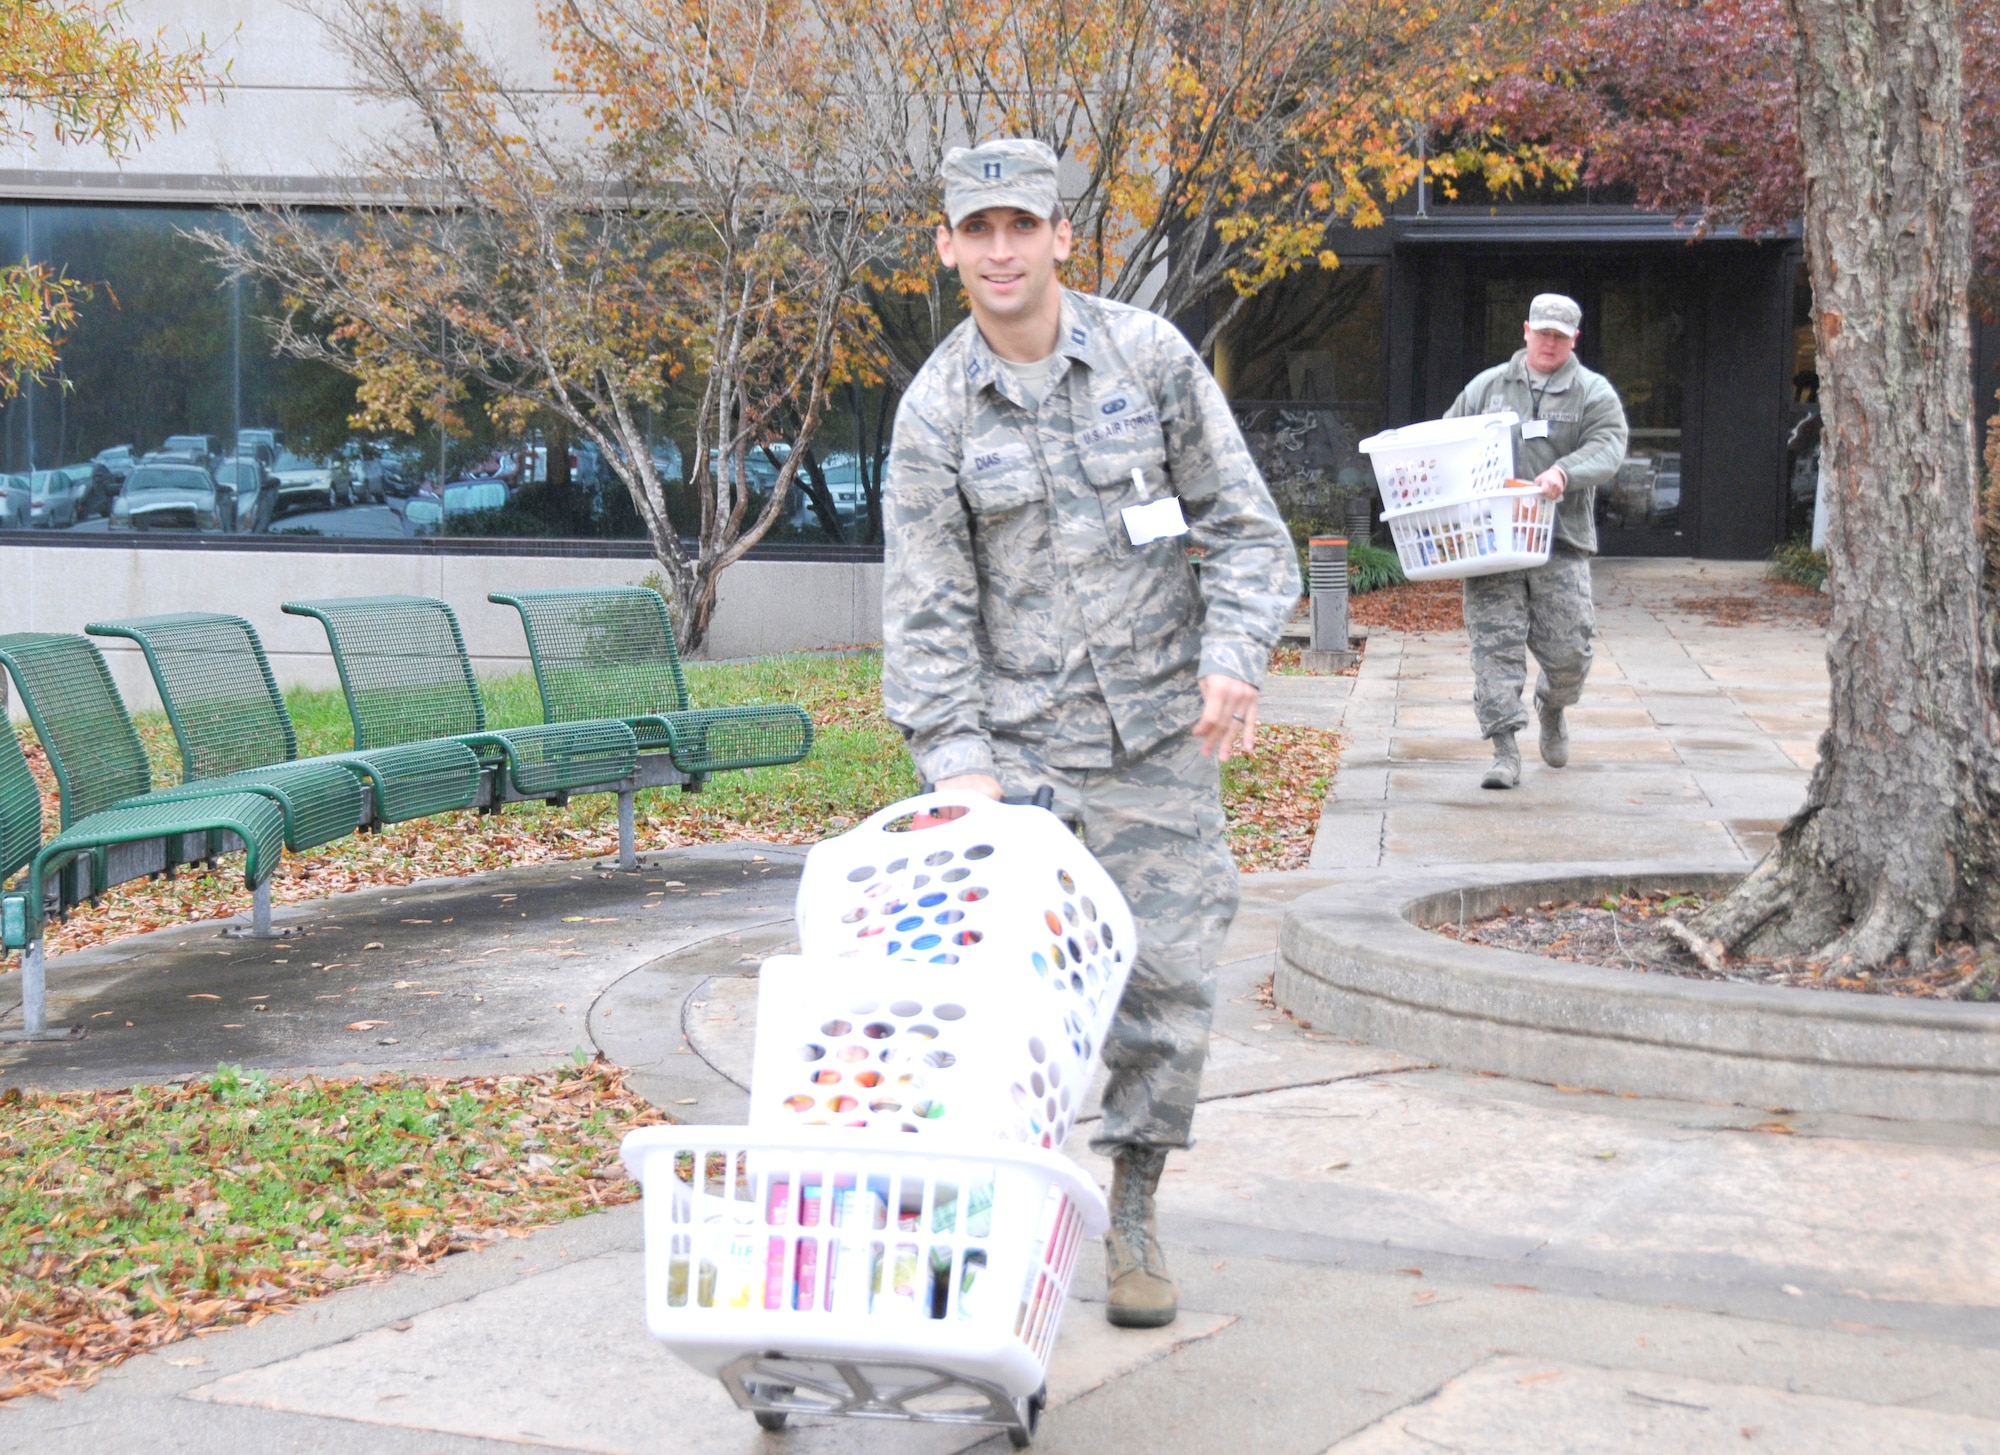 Capt. Jonathon Dias, pictured front, and Master Sgt. Jason Knipe help load baskets of food donated as part of the Thanksgiving Food Basket Program at Arnold Air Force Base. With help from AEDC team members across base, members of the Junior Force Council at Arnold collected donations for 51 food baskets for Coffee County families in need of Thanksgiving meals. (U.S. Air Force photo by Deidre Ortiz)